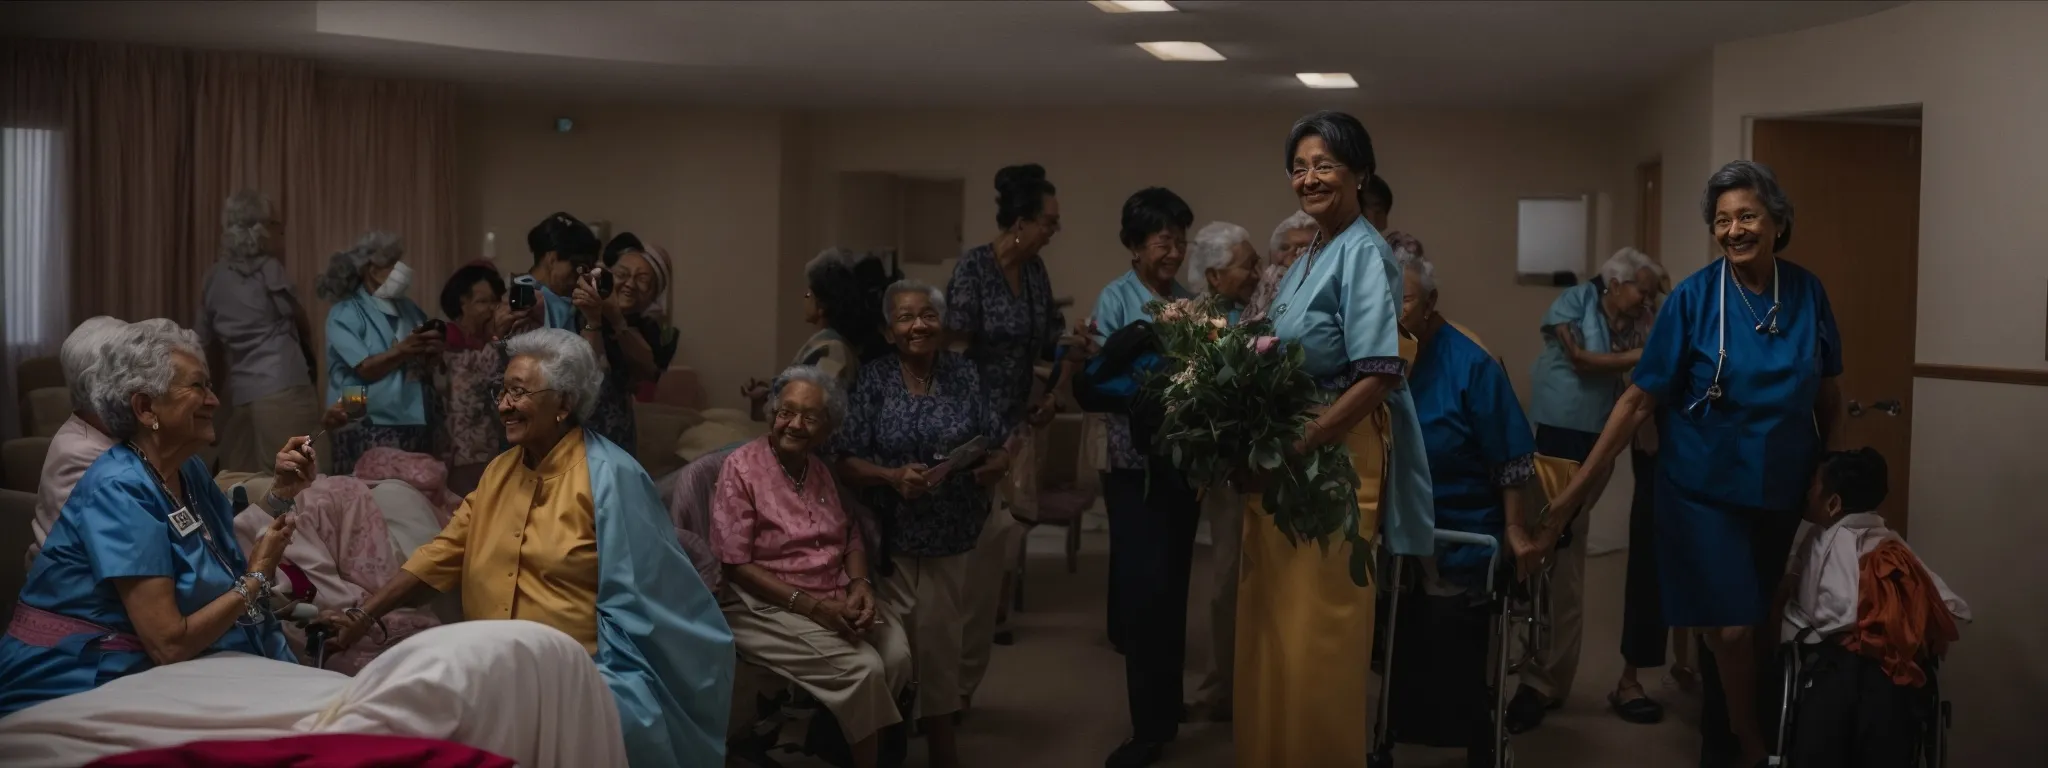 a professional at a nursing home takes a smiling group photo of residents during a social activity, later to be shared on their social media page.